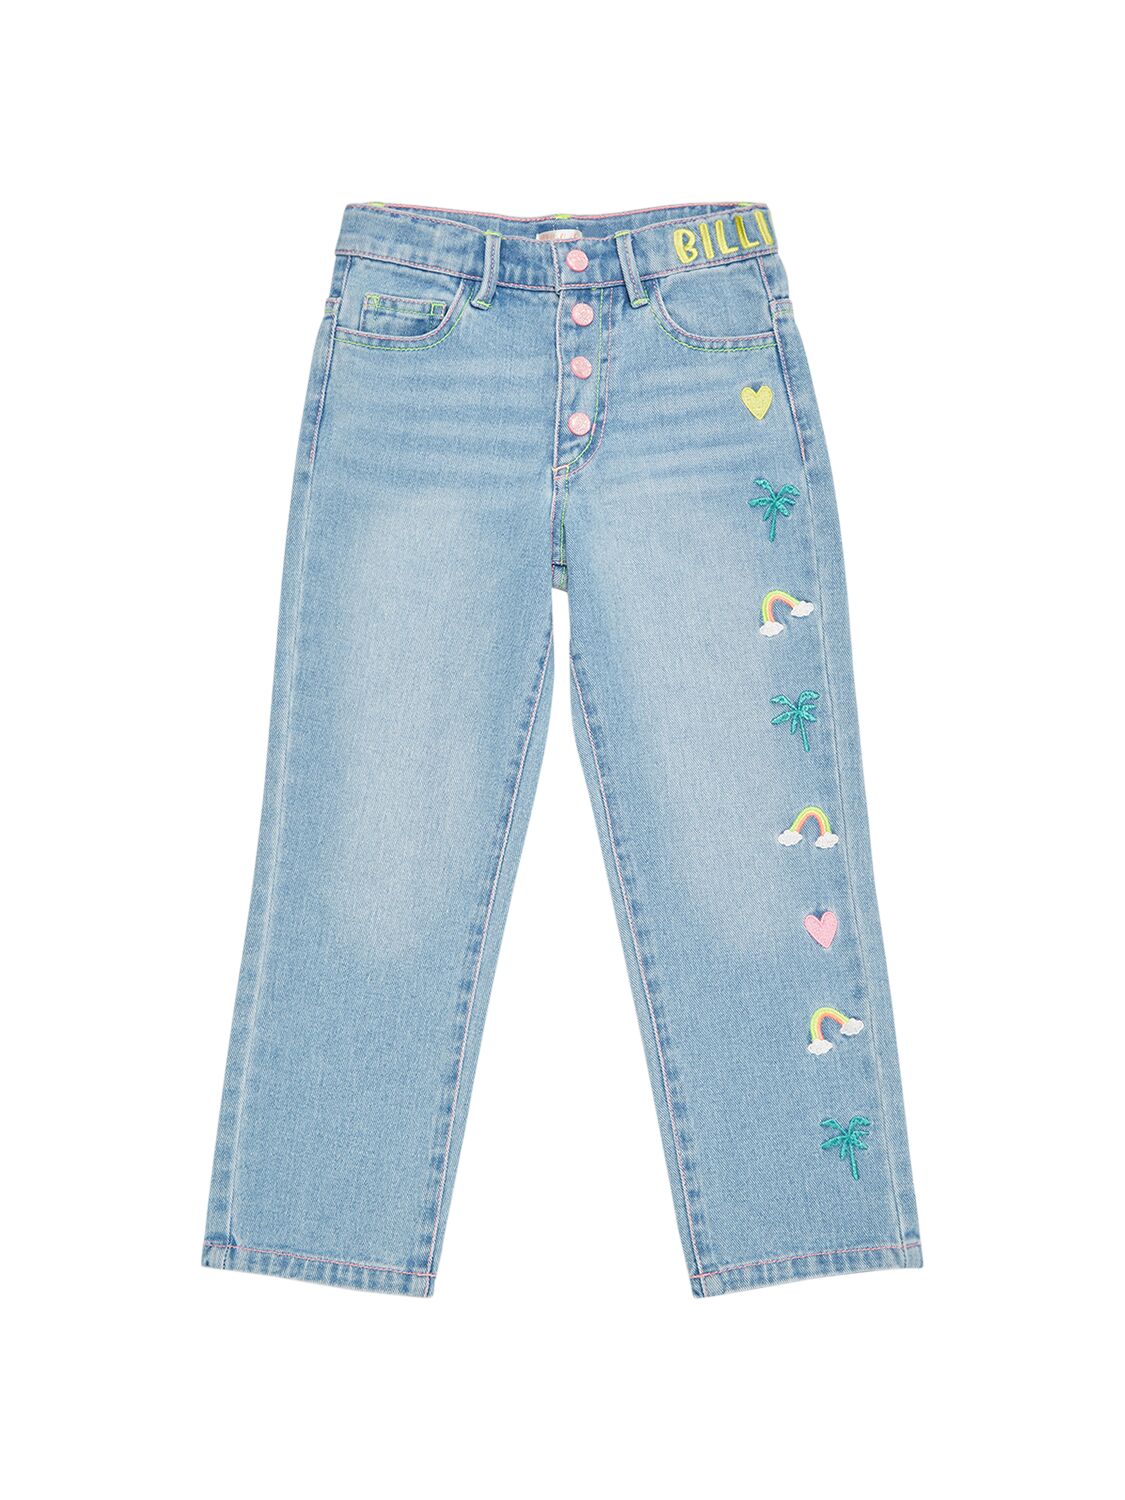 Image of Embroidered Cotton Denim Jeans